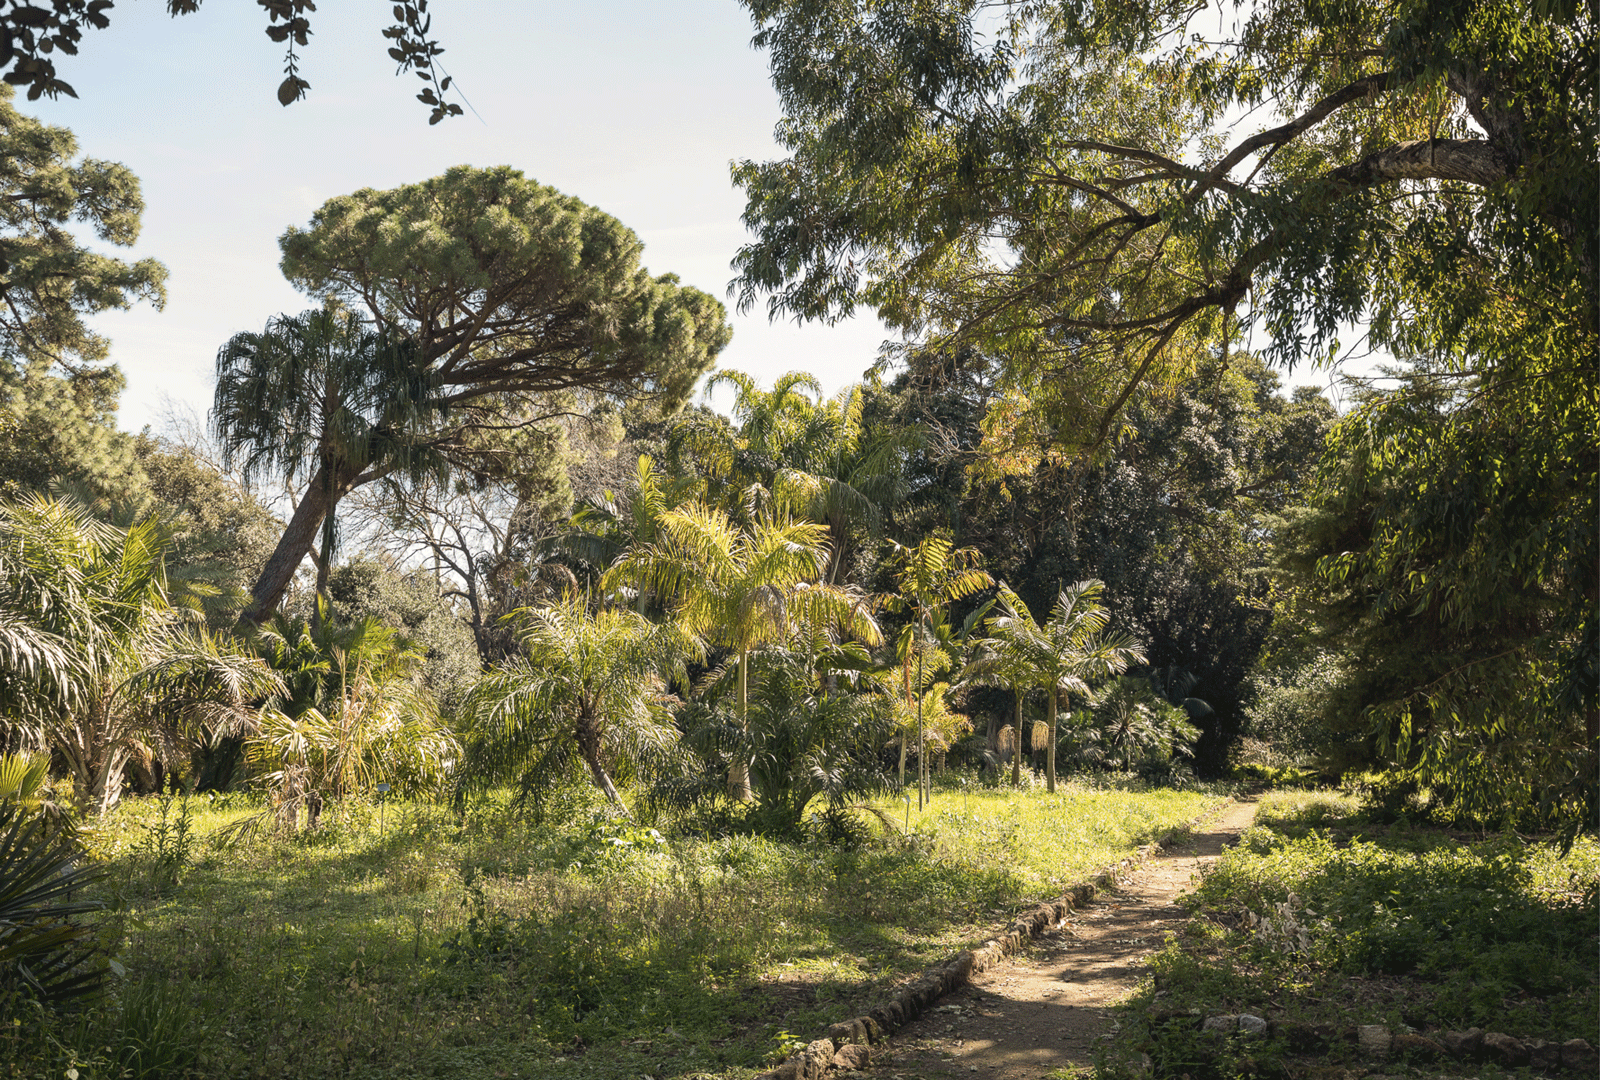 Palermo's Botanical Garden was a “key inspiration” for the curatorial vision of Manifesta 12 Courtesy of OMA